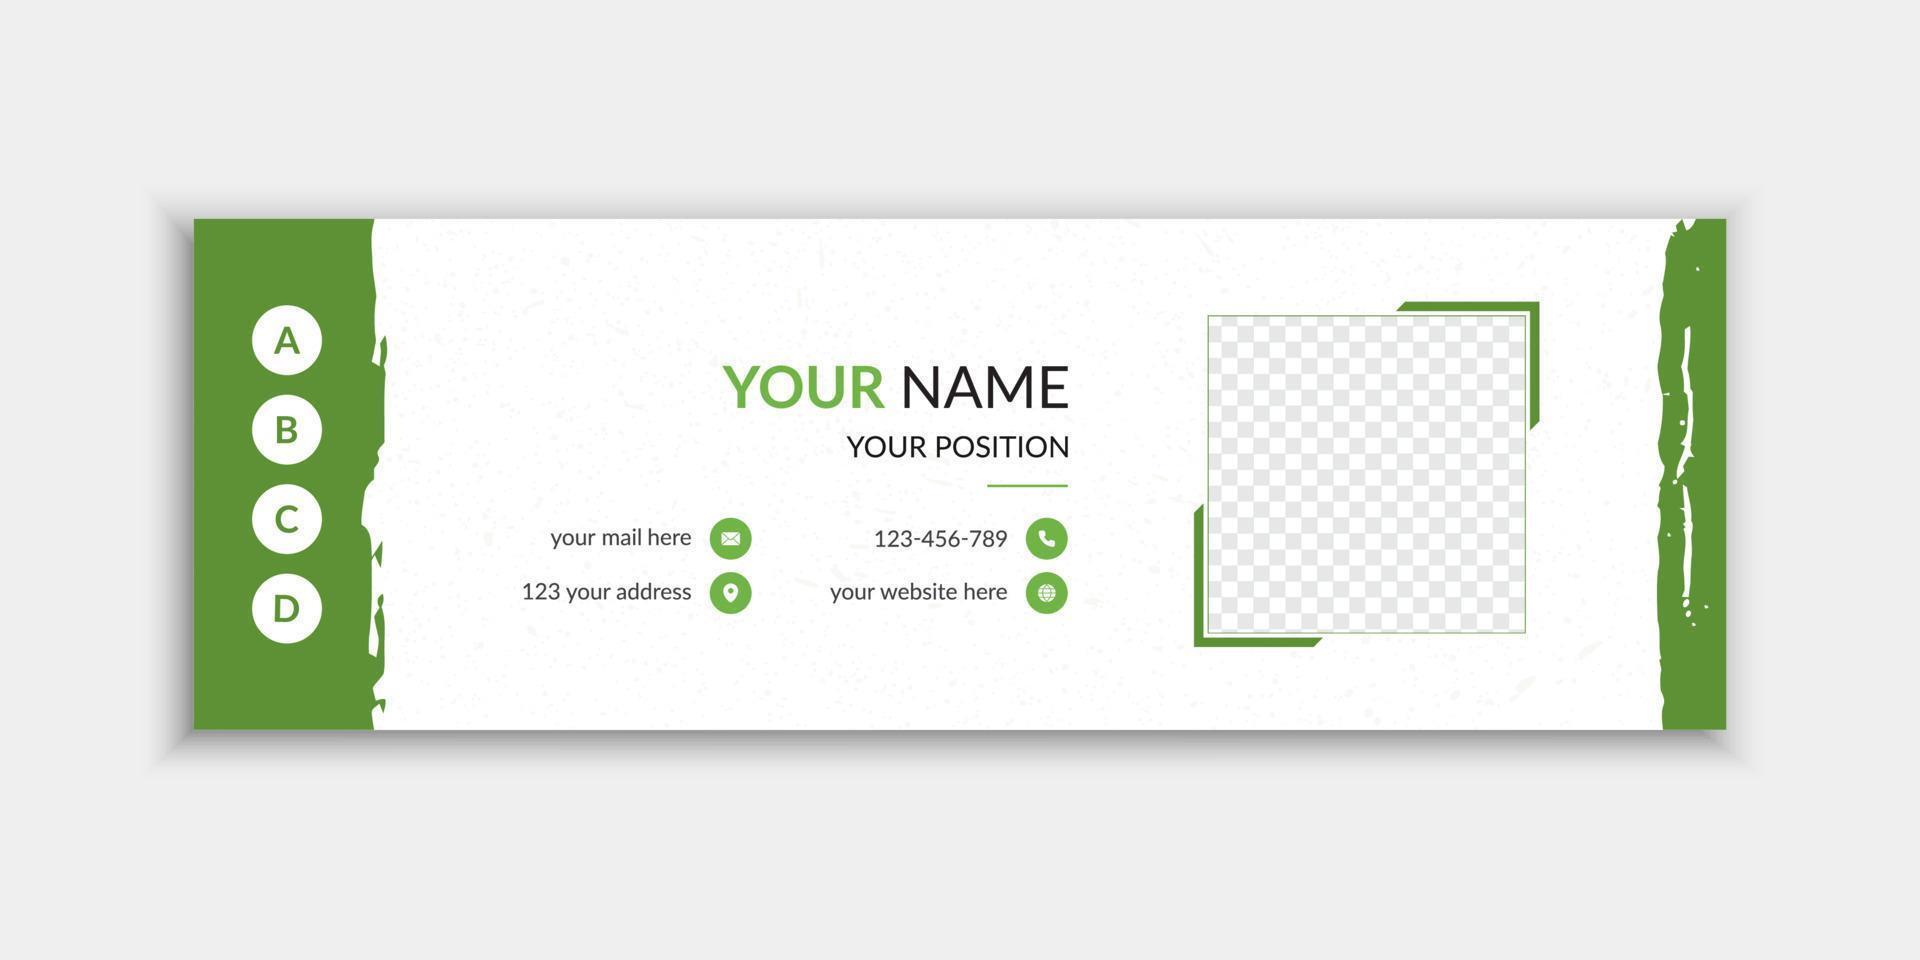 Professional business email signature or email footer template design vector